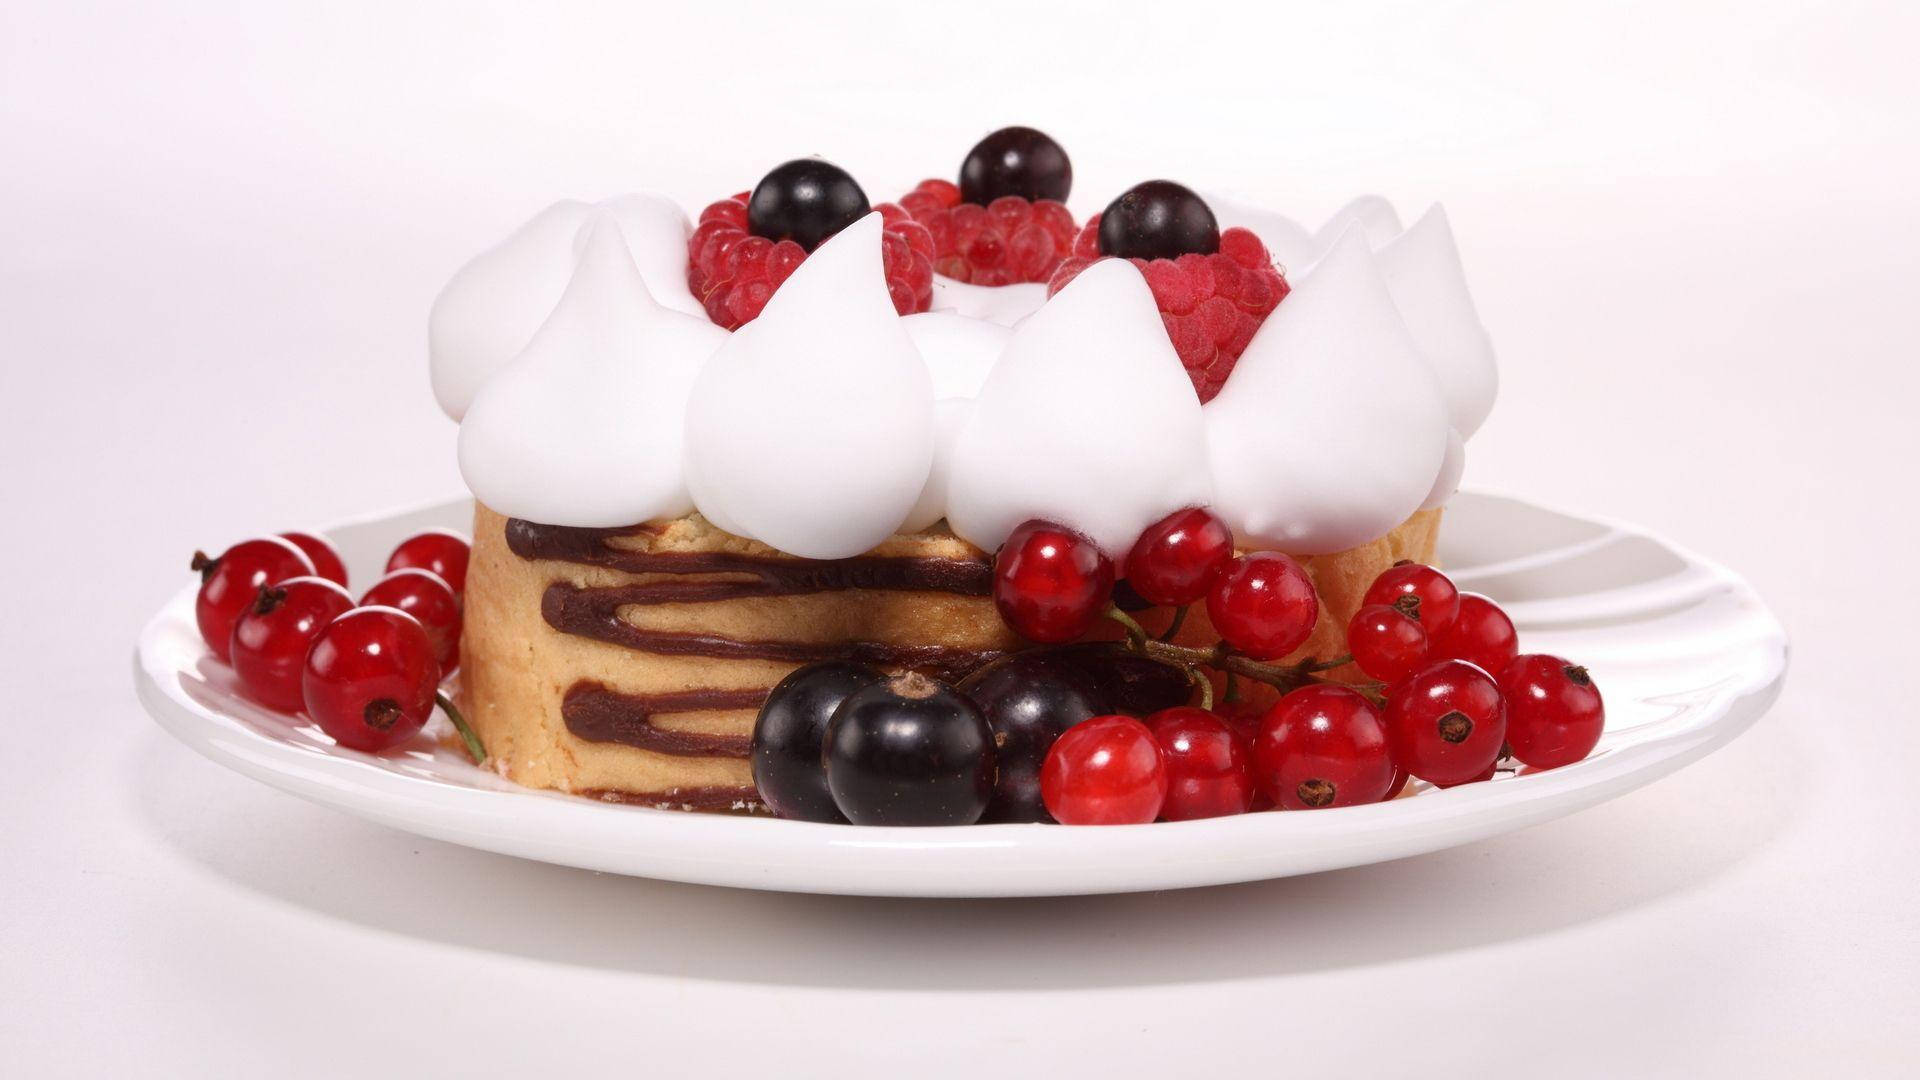 Berry-topped Cake Desserts Wallpaper